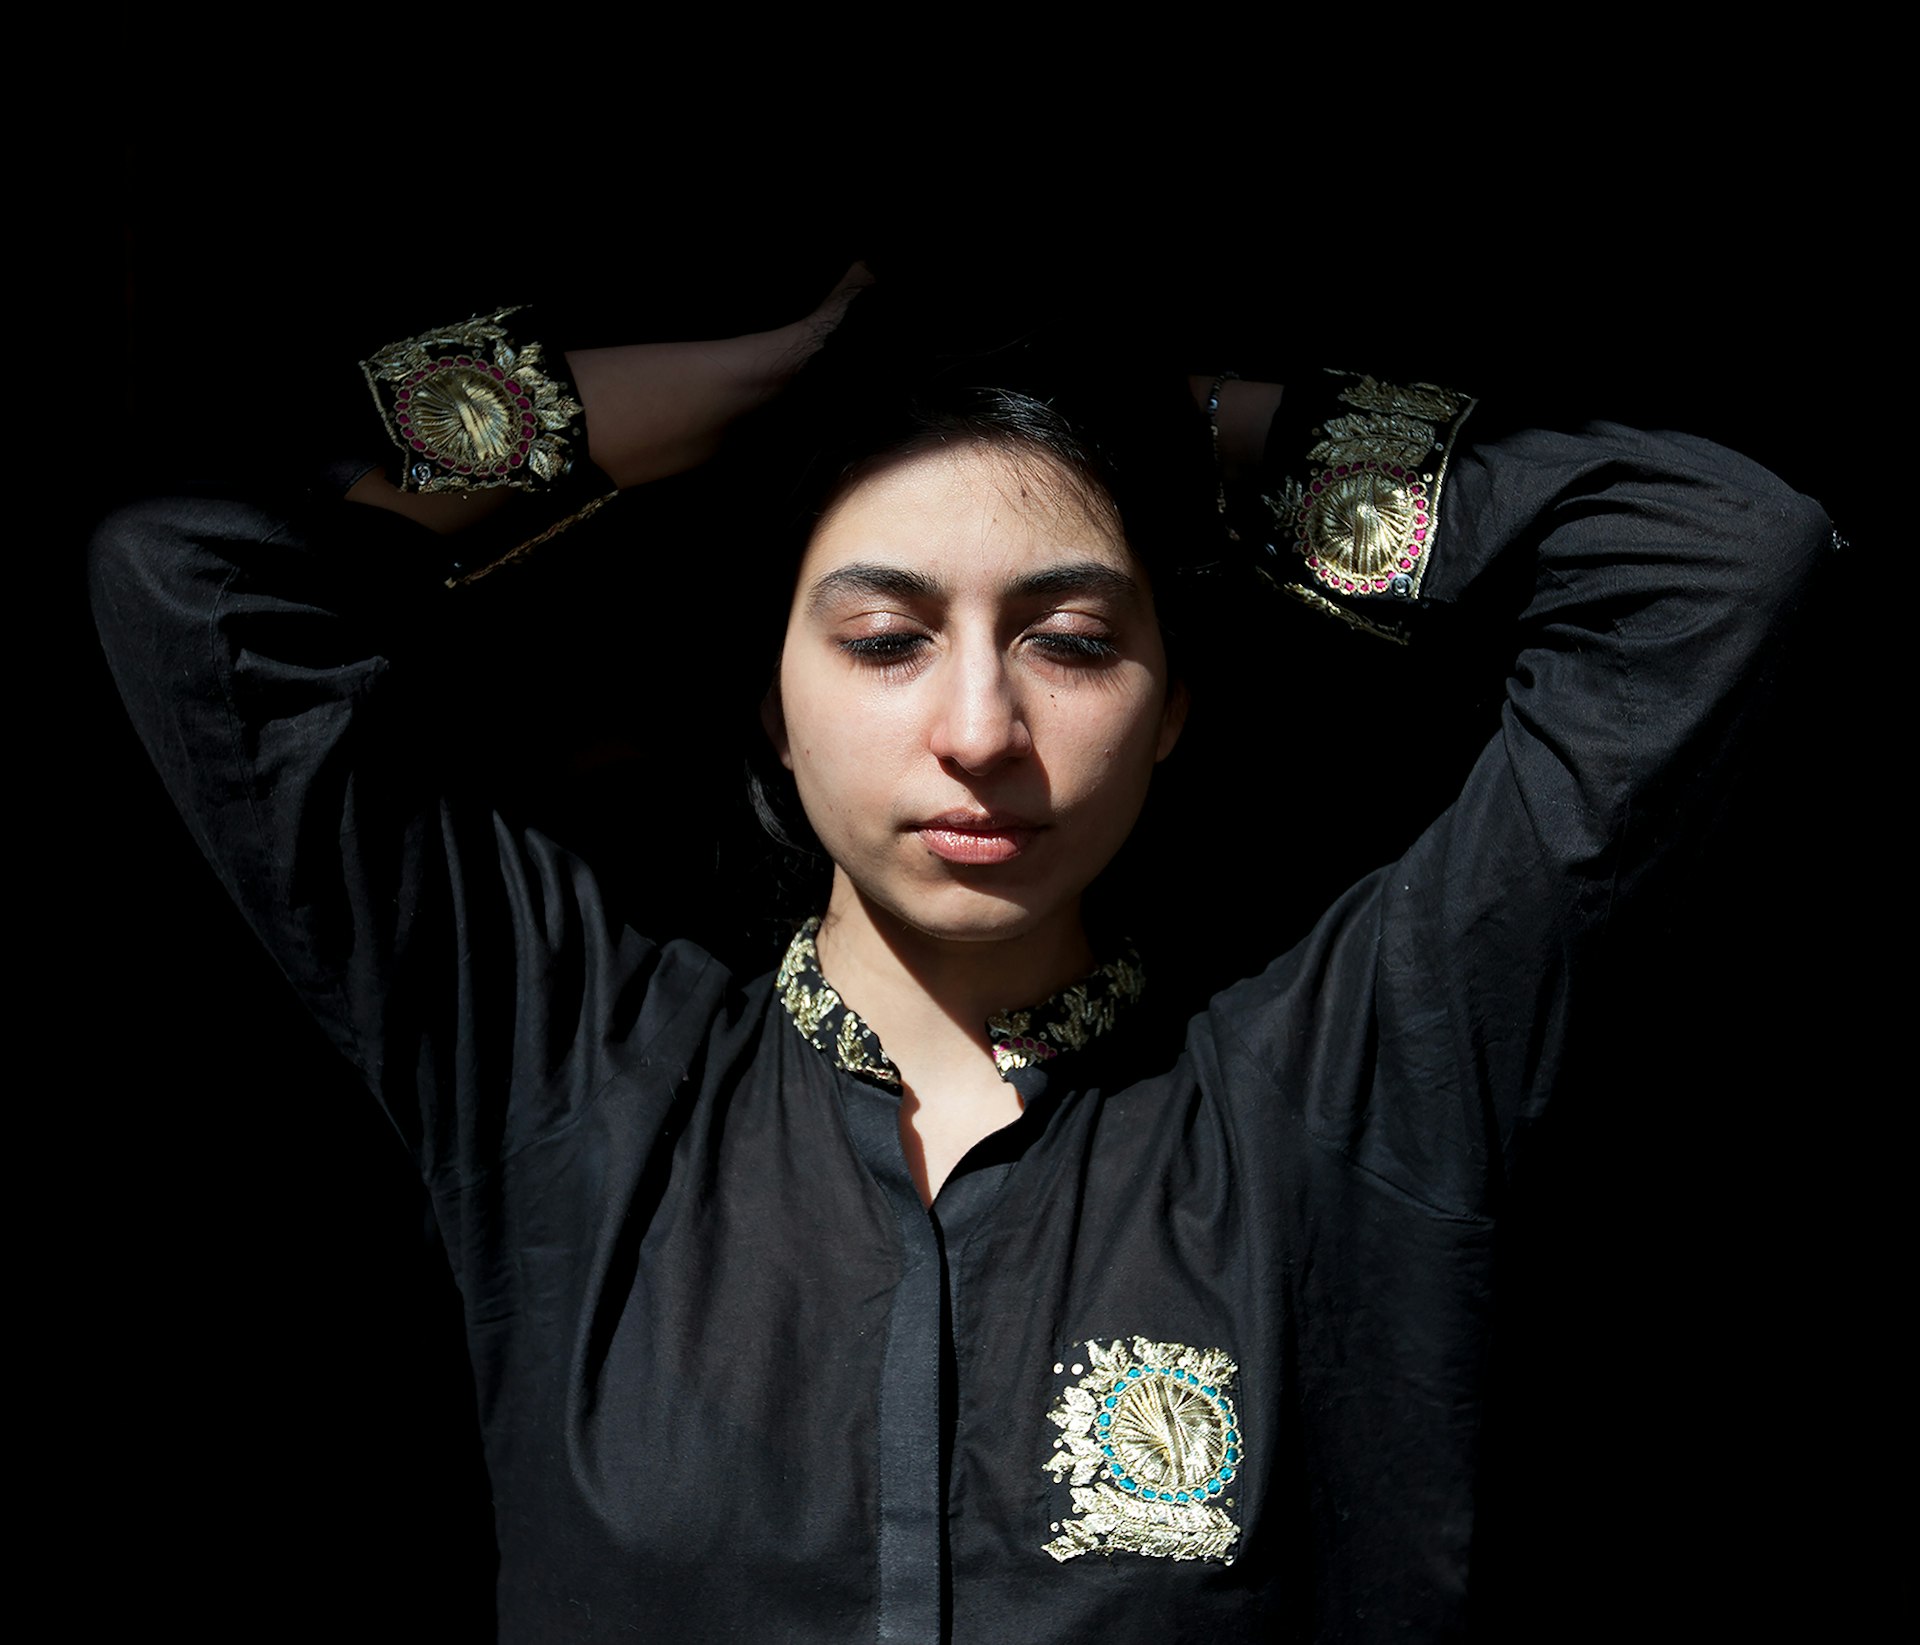 Musician Arooj Aftab rejected Pakistan’s traditional path to succeed on her own terms